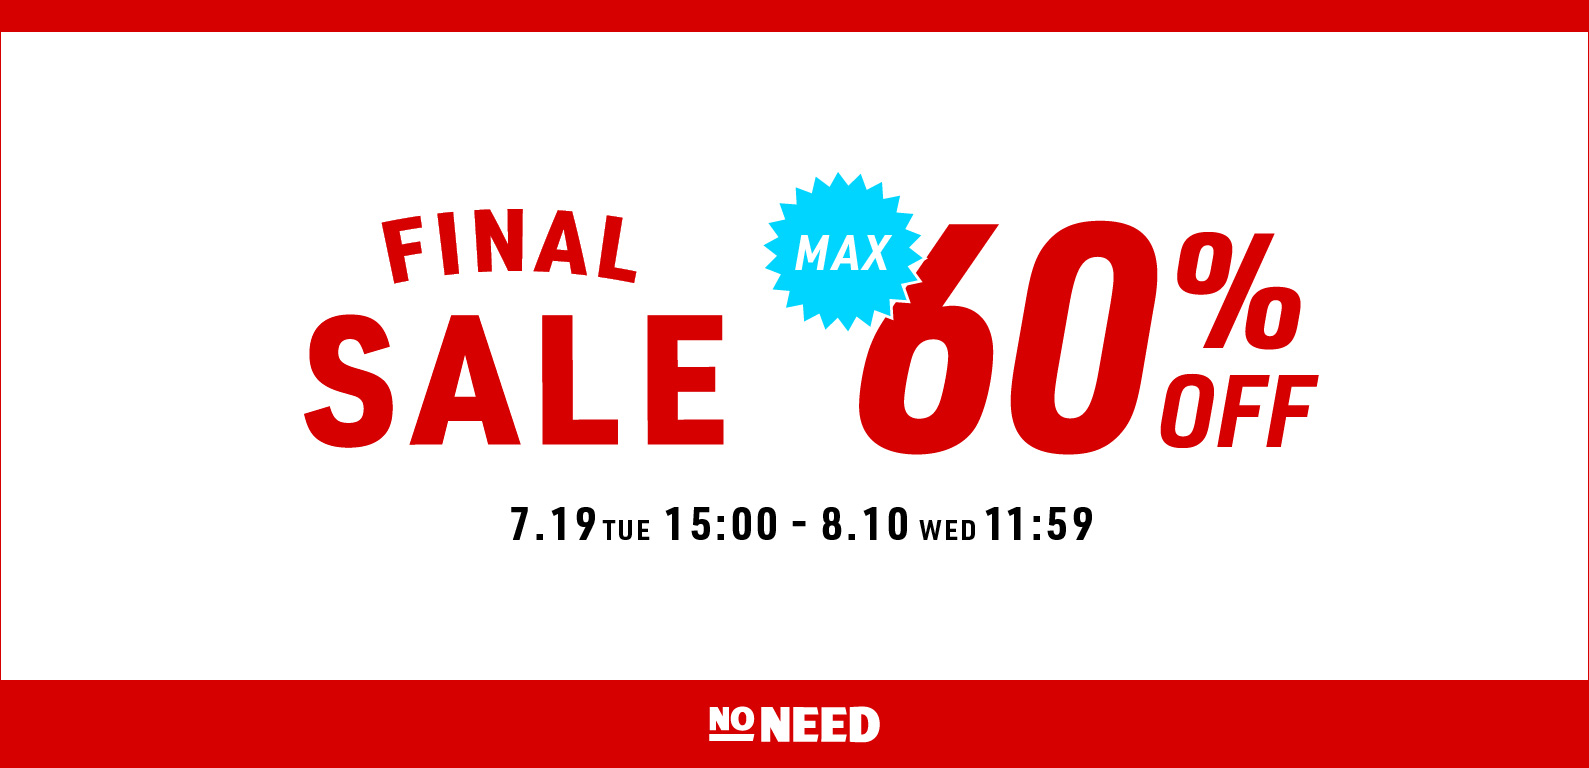 NONEED | FINAL SALE